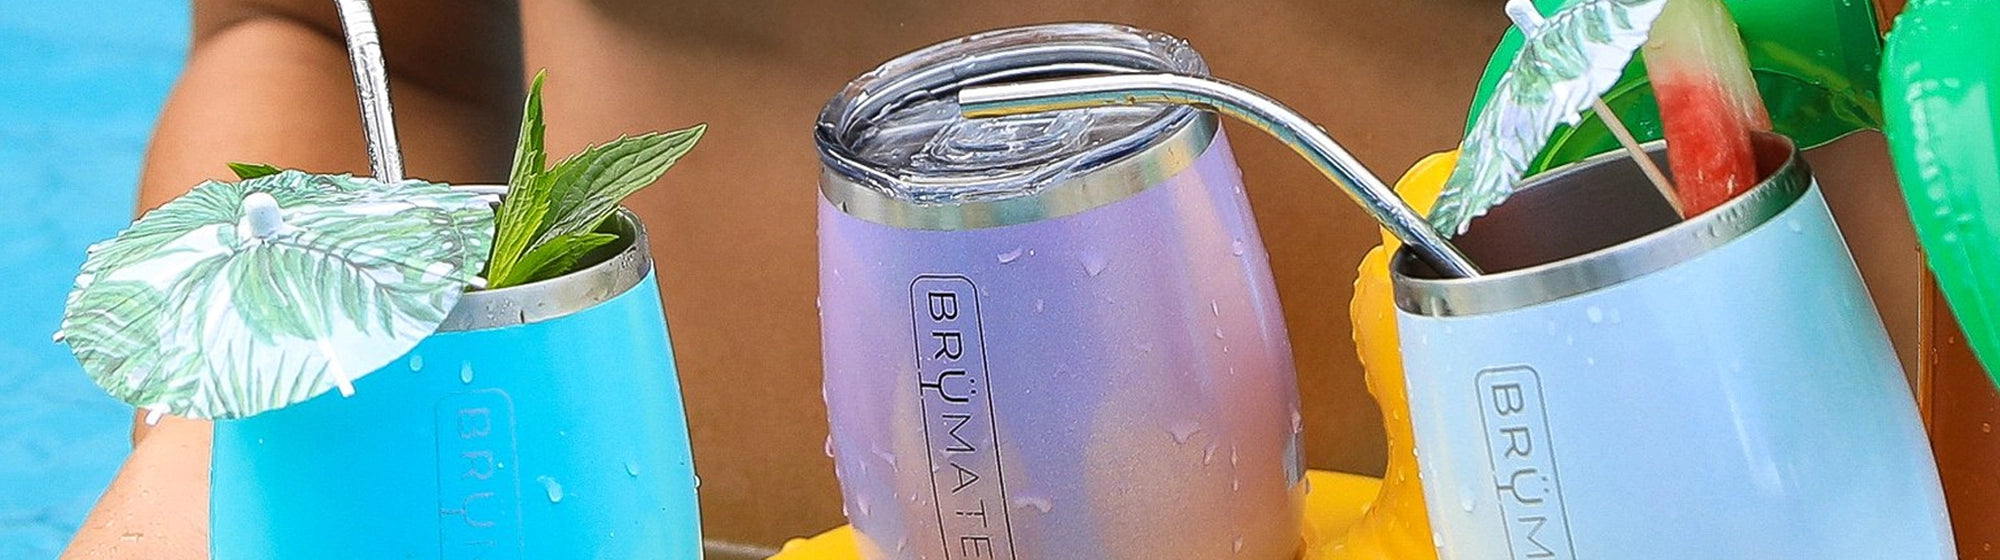 Drinkware lids, straws and accessories.  Image shows brumate wine tumblers